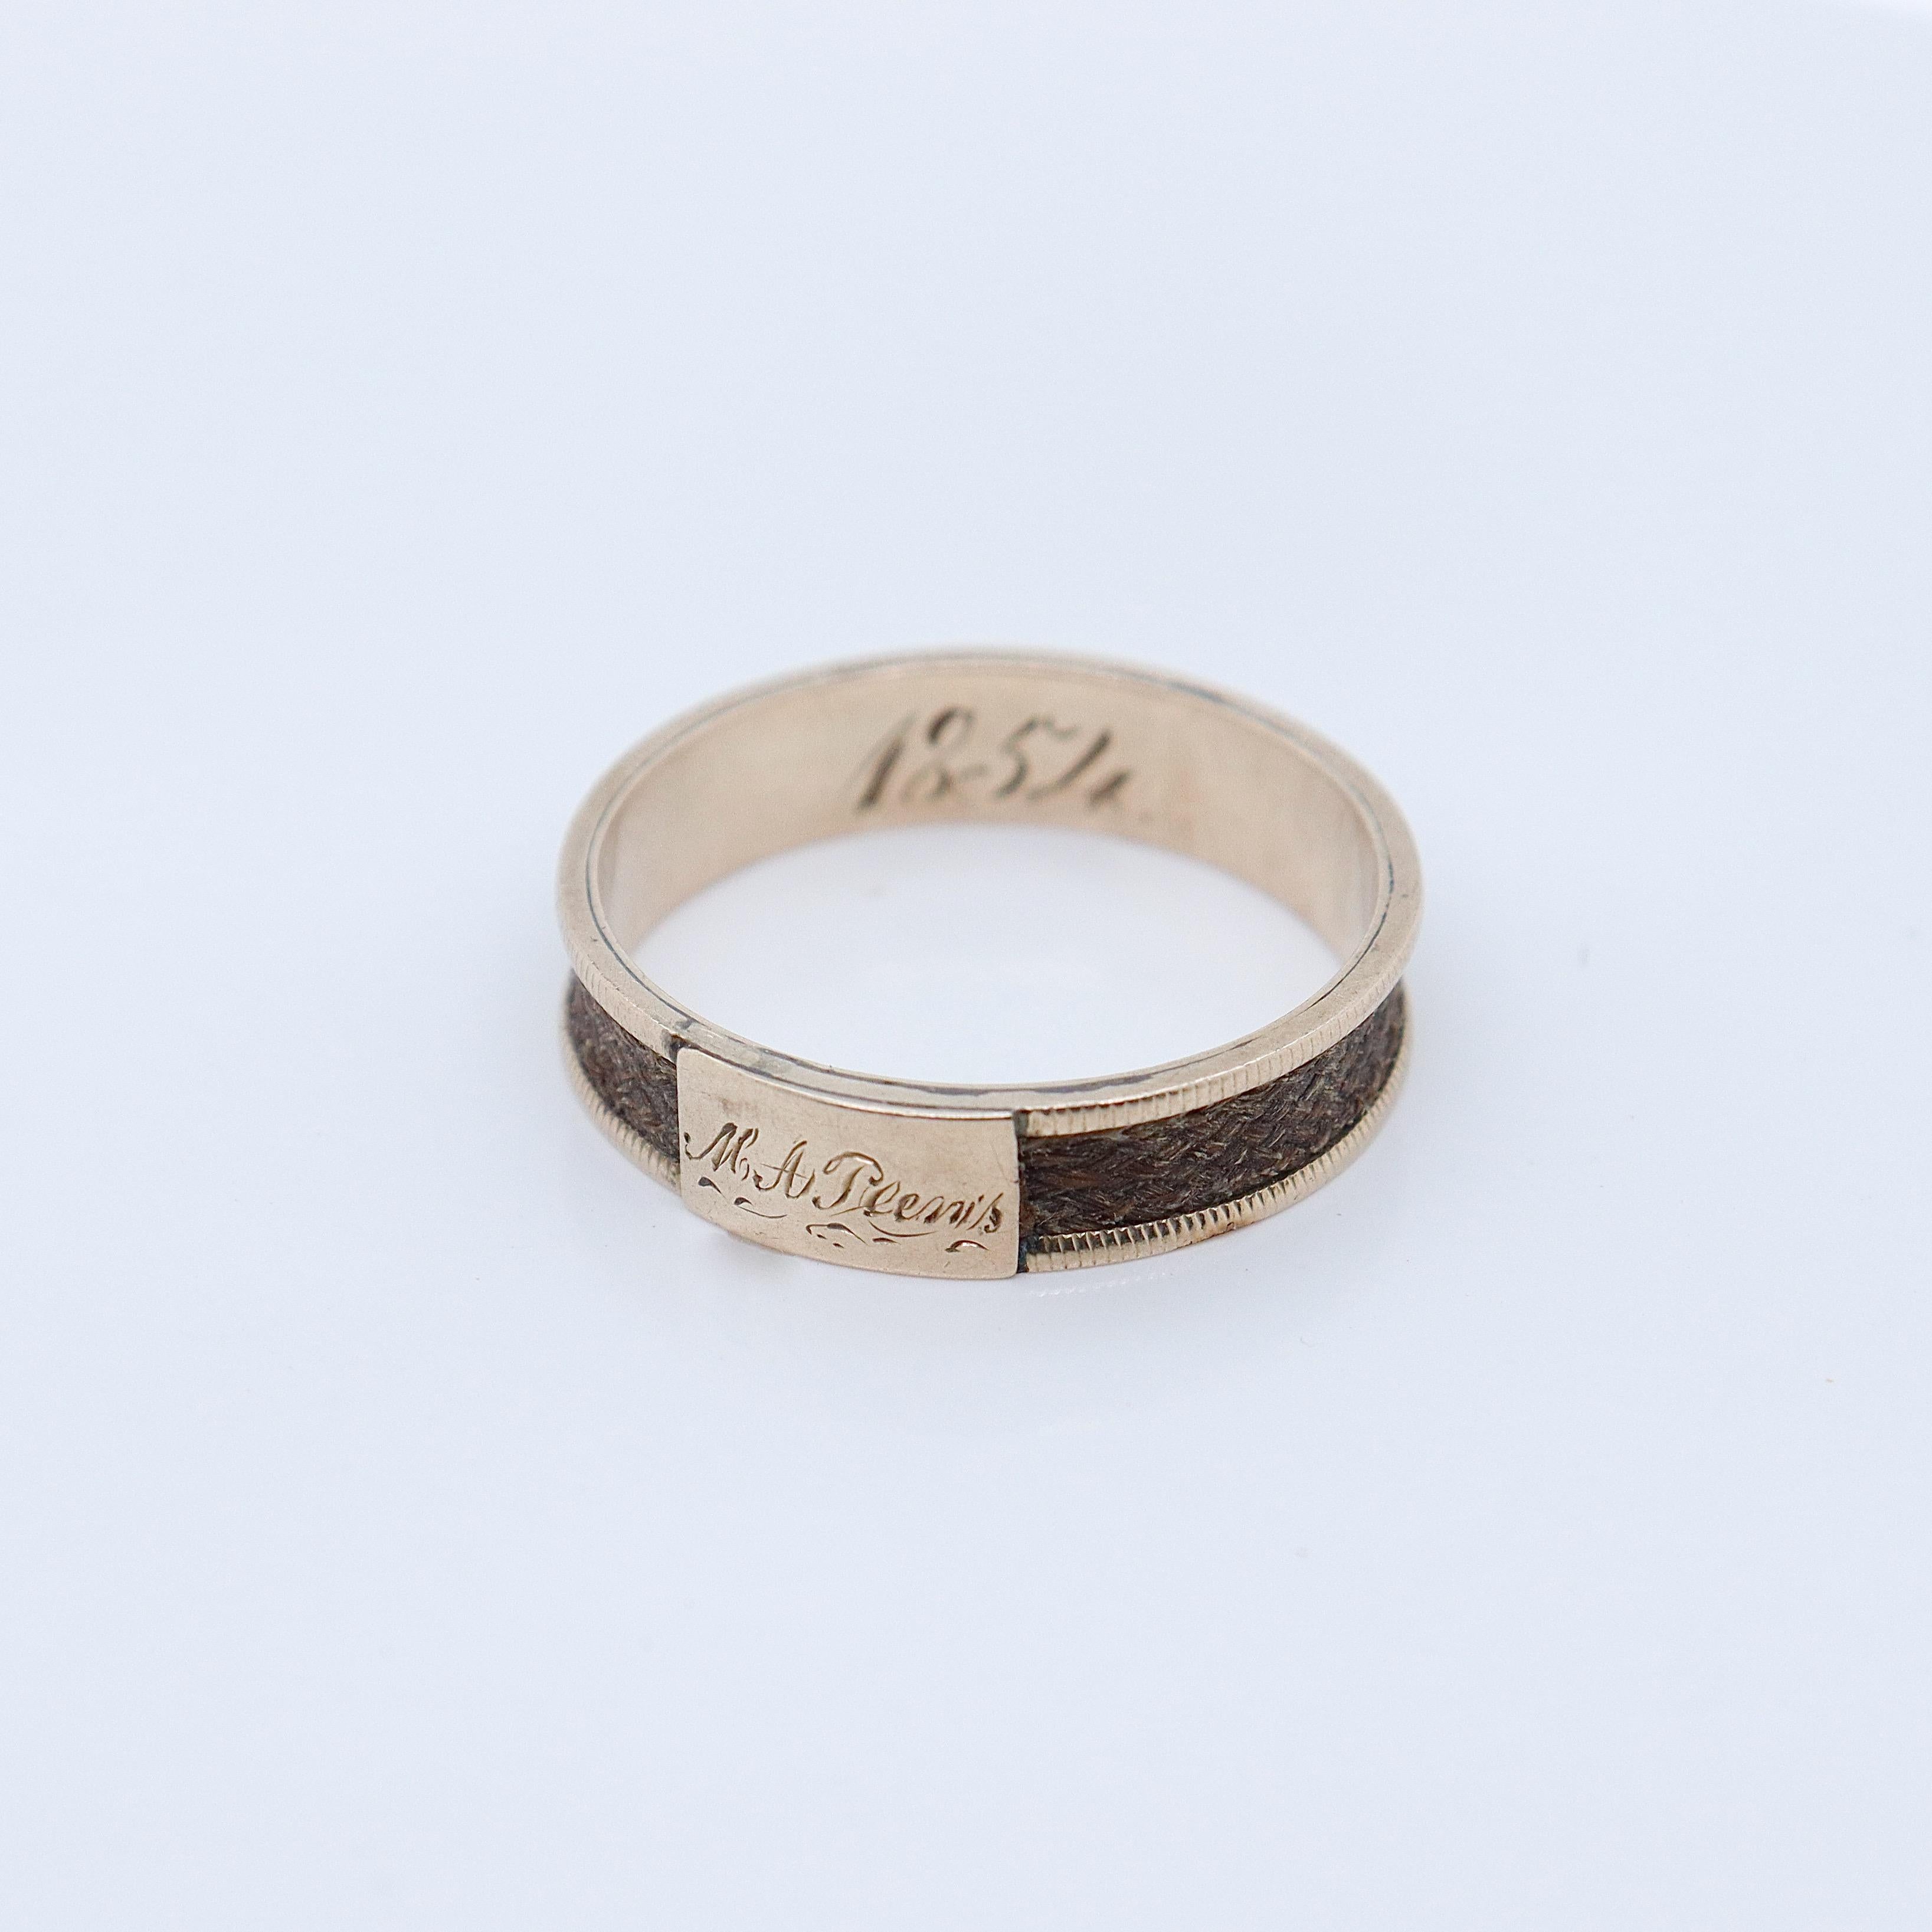 A fine antique Victorian mourning band ring.

In 9k gold.

Channel set with a strand of braided hair. 

Engraved with a name to a plaque on the front and with the date 1854 to the shank.

Simply a wonderful mourning ring!

Date:
1854

Overall